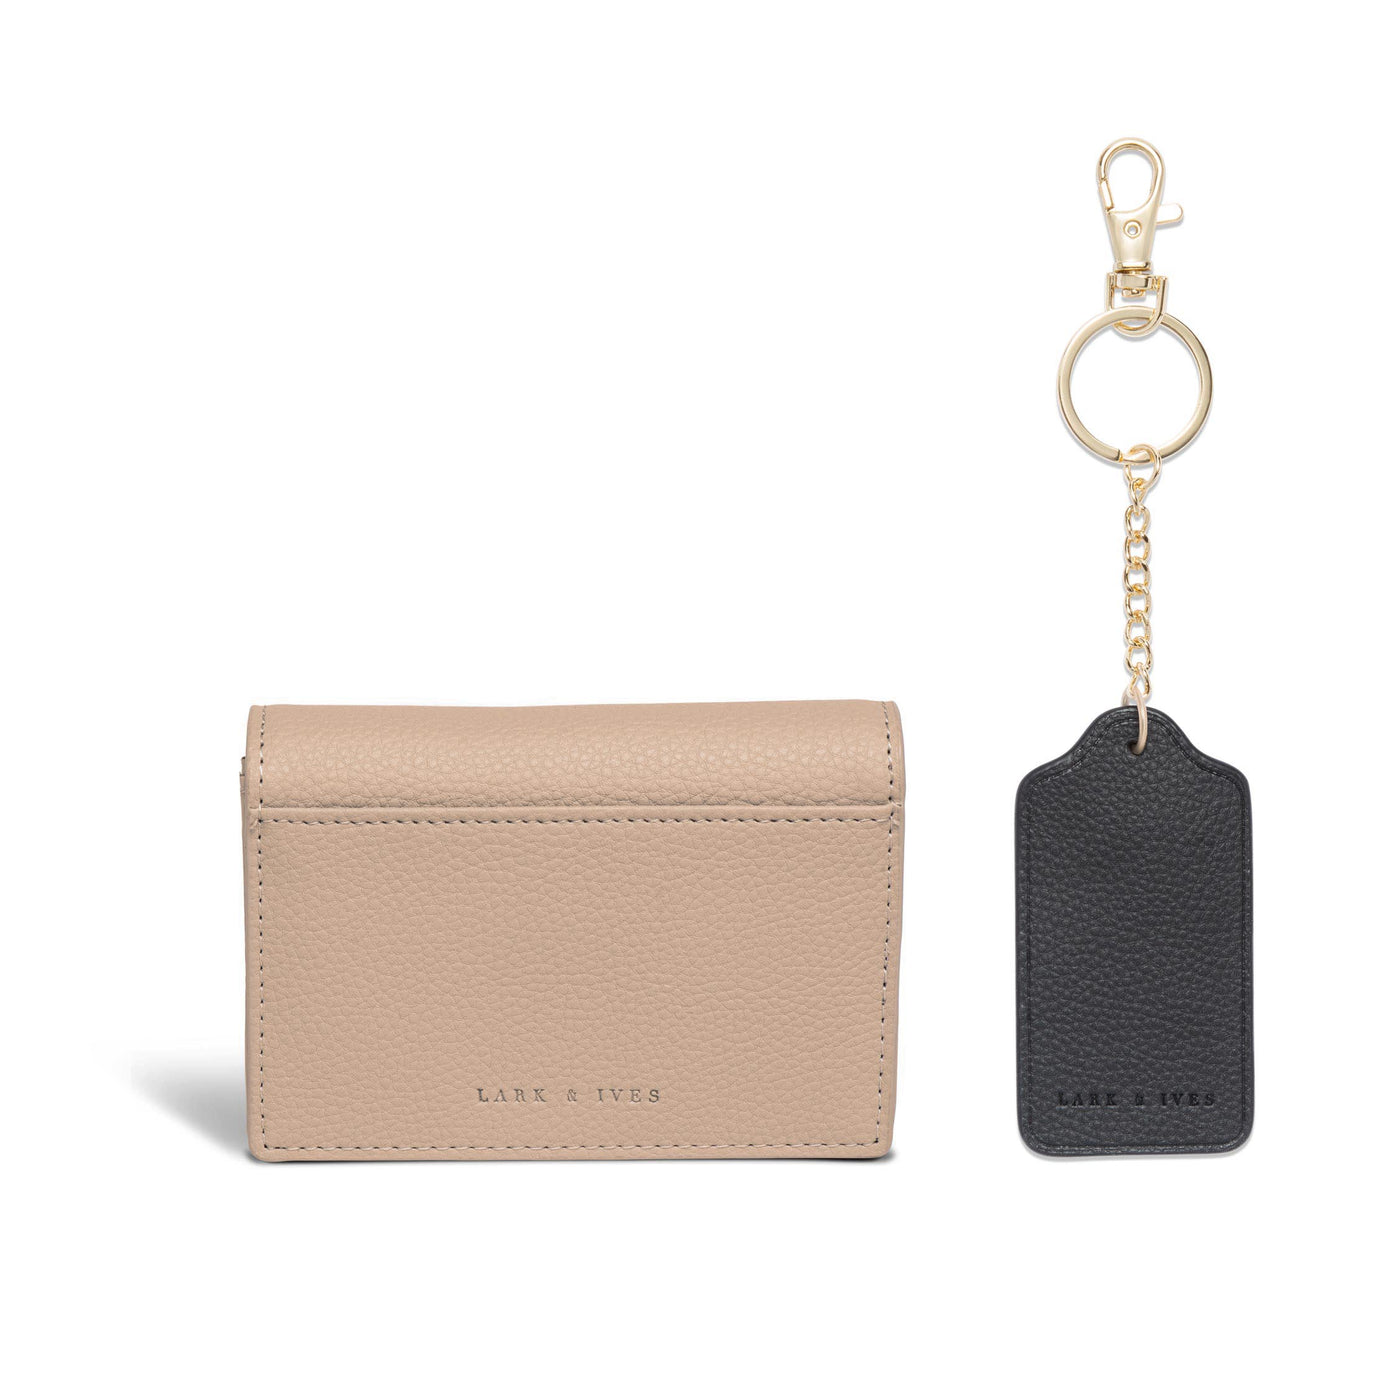 Lark and Ives / Vegan Leather Accessories / Small Accessories / Wallet / Mini Wallet / Card Case / Card Holder / Button snap closure / Fold Wallet / Tag Keychain / Keychain / Key Holder / Tan Card Case and Black Keychain